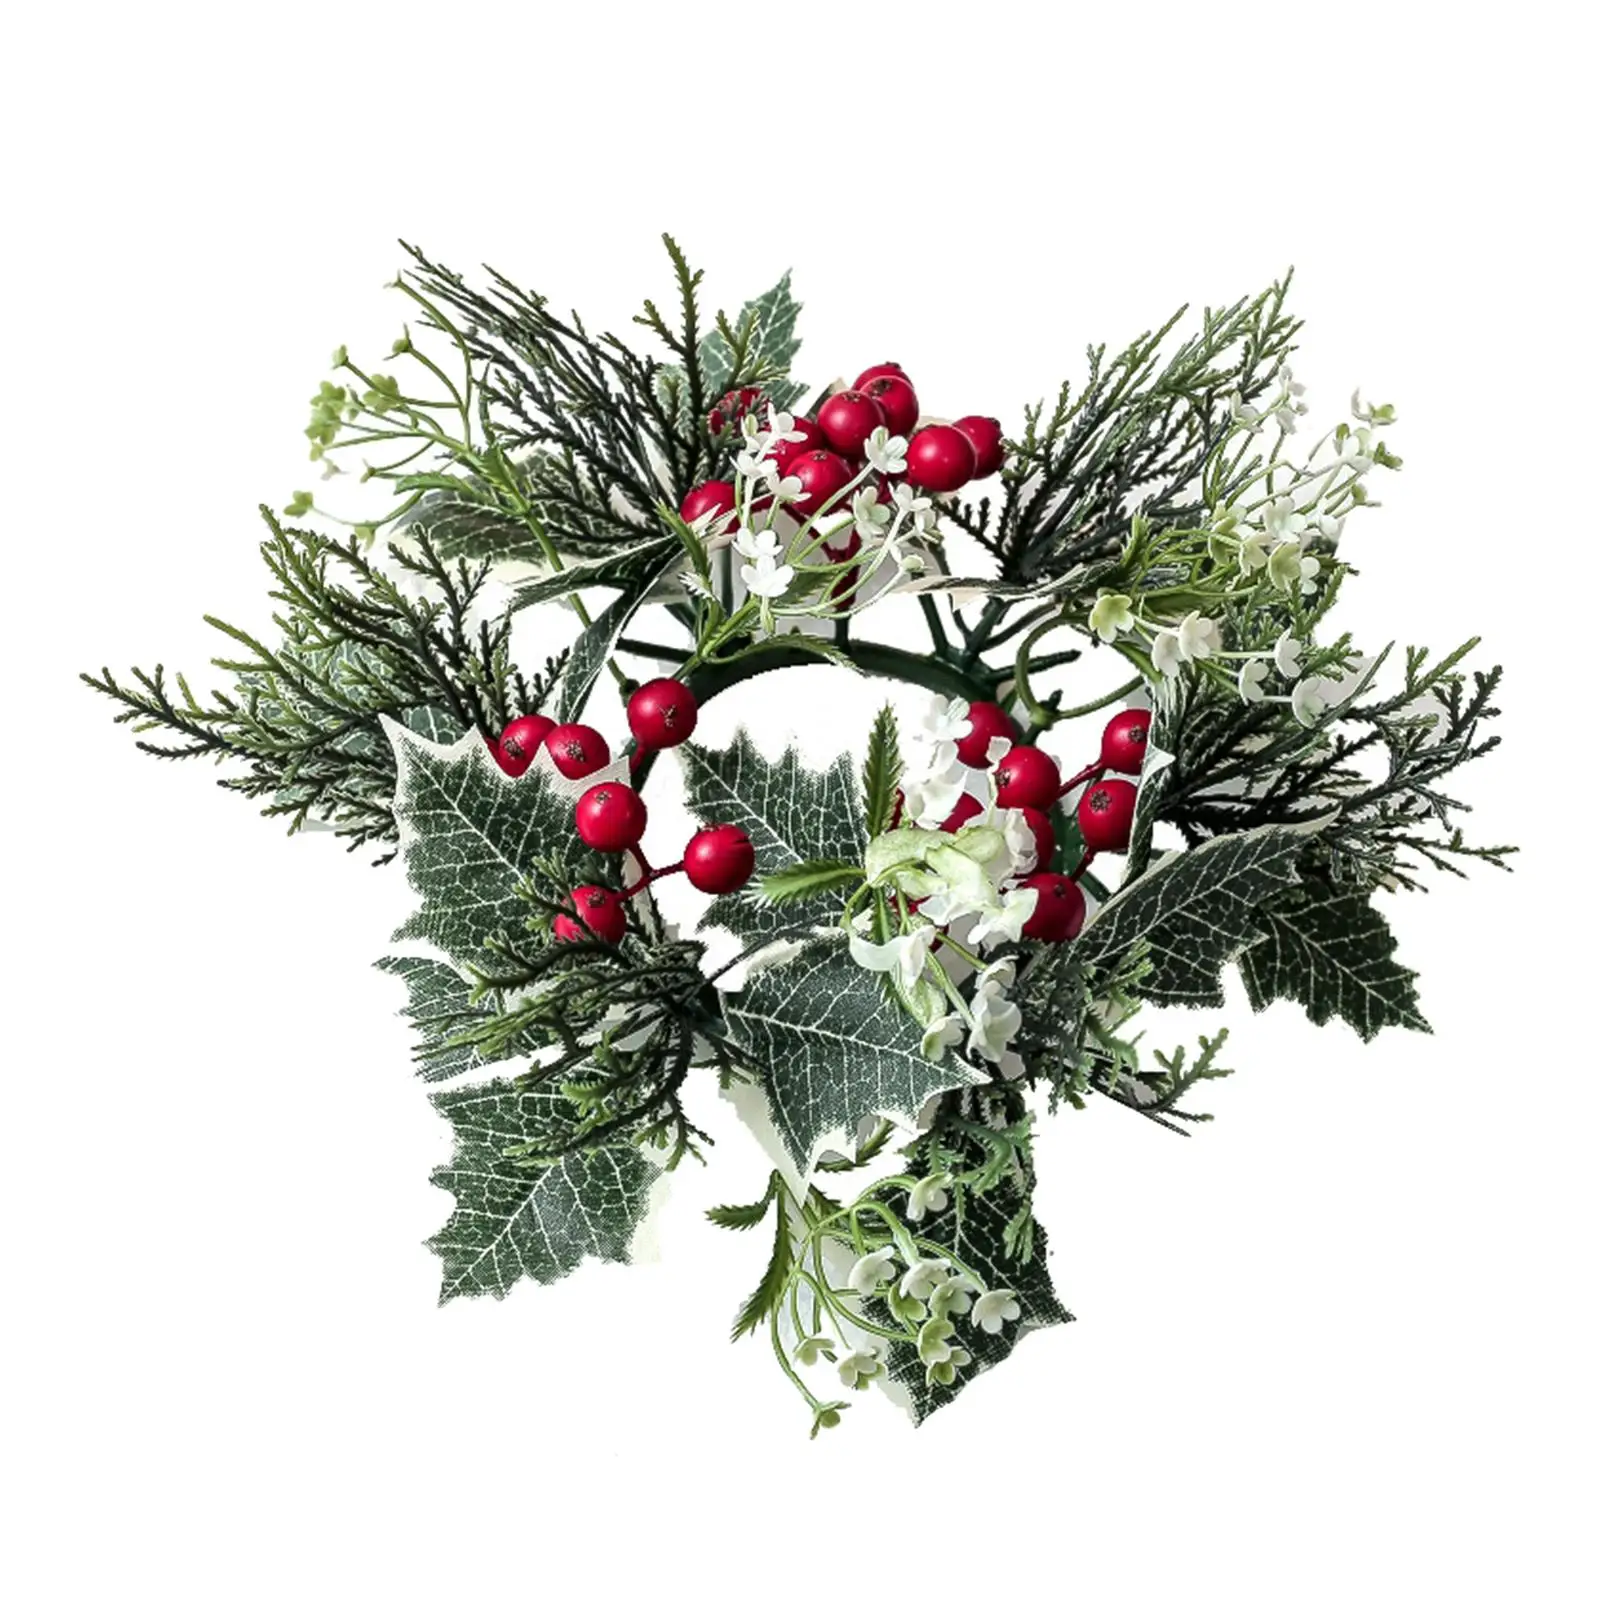 Pillar Candle Rings Wreath Centerpieces Decorative Artificial Leaves Green